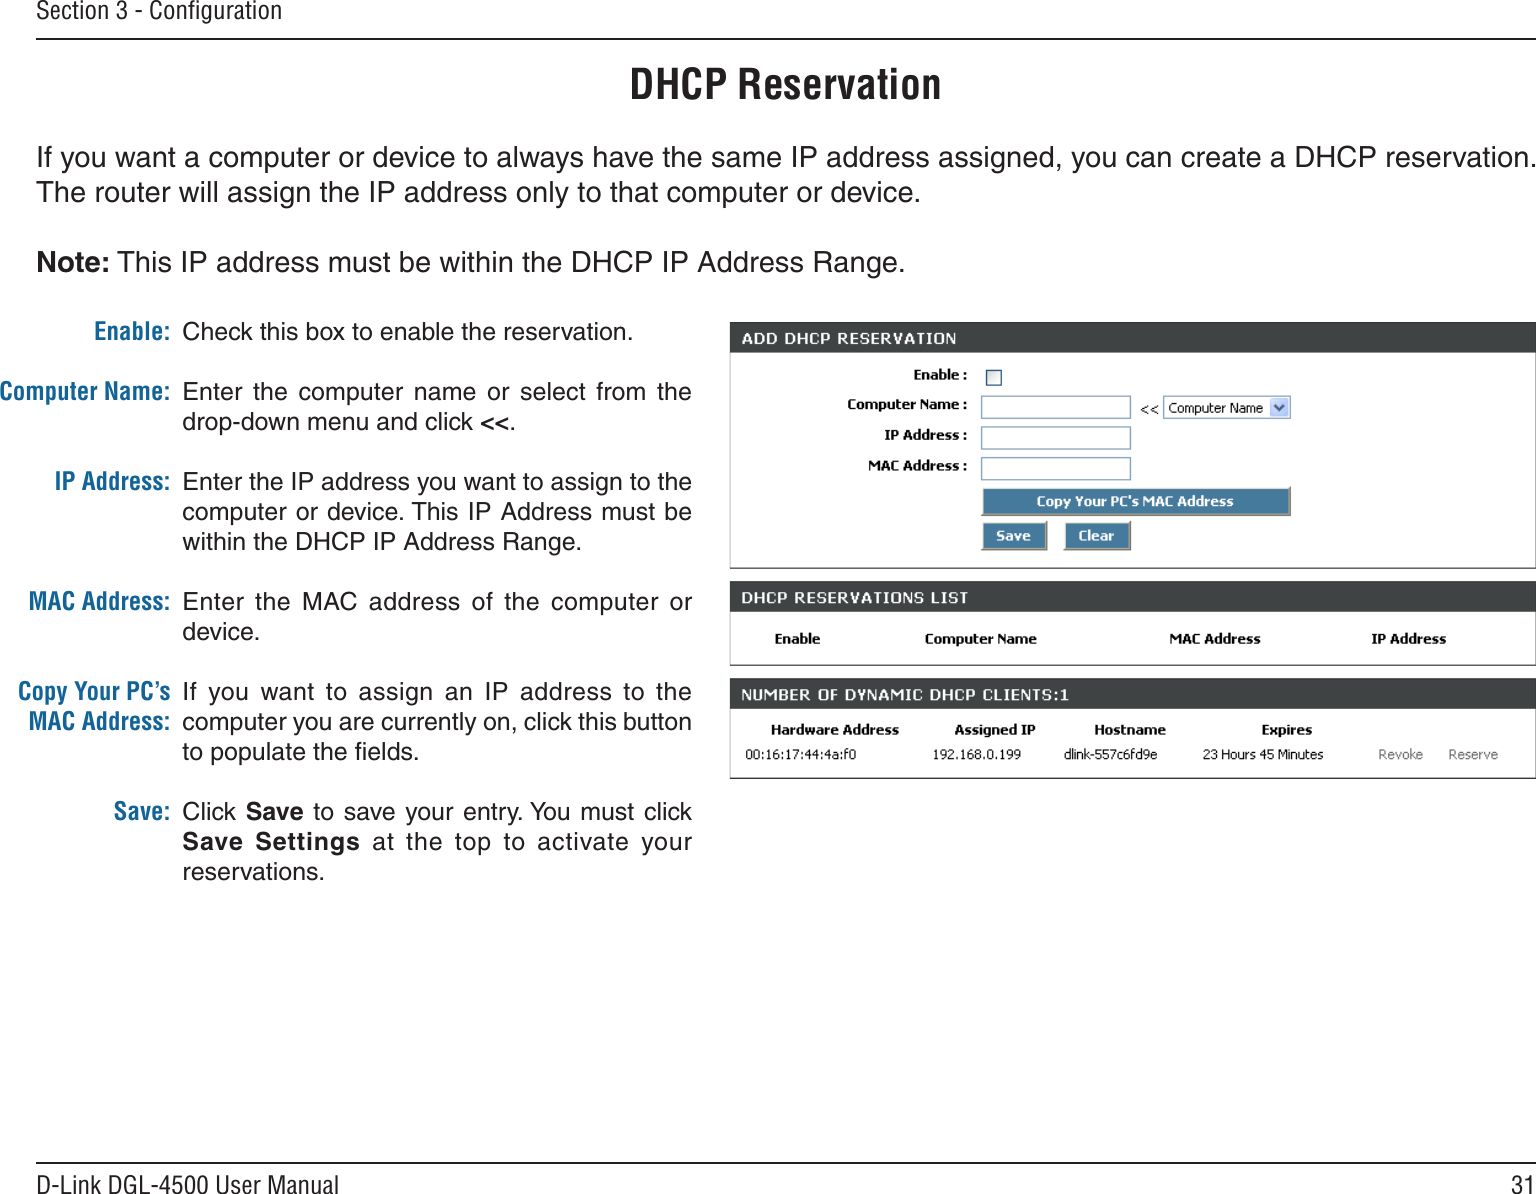 31D-Link DGL-4500 User ManualSection 3 - ConﬁgurationDHCP ReservationIf you want a computer or device to always have the same IP address assigned, you can create a DHCP reservation. The router will assign the IP address only to that computer or device. Note: This IP address must be within the DHCP IP Address Range.Check this box to enable the reservation.Enter  the  computer  name  or  select  from  the drop-down menu and click &lt;&lt;.Enter the IP address you want to assign to the computer or device. This IP Address must be within the DHCP IP Address Range.Enter  the  MAC  address  of  the  computer  or device.If  you want  to  assign  an  IP  address  to  the computer you are currently on, click this button to populate the ﬁelds. Click Save to save your entry. You  must click Save  Settings  at  the  top  to  activate  your reservations. Enable:Computer Name:IP Address:MAC Address:Copy Your PC’s MAC Address:Save: